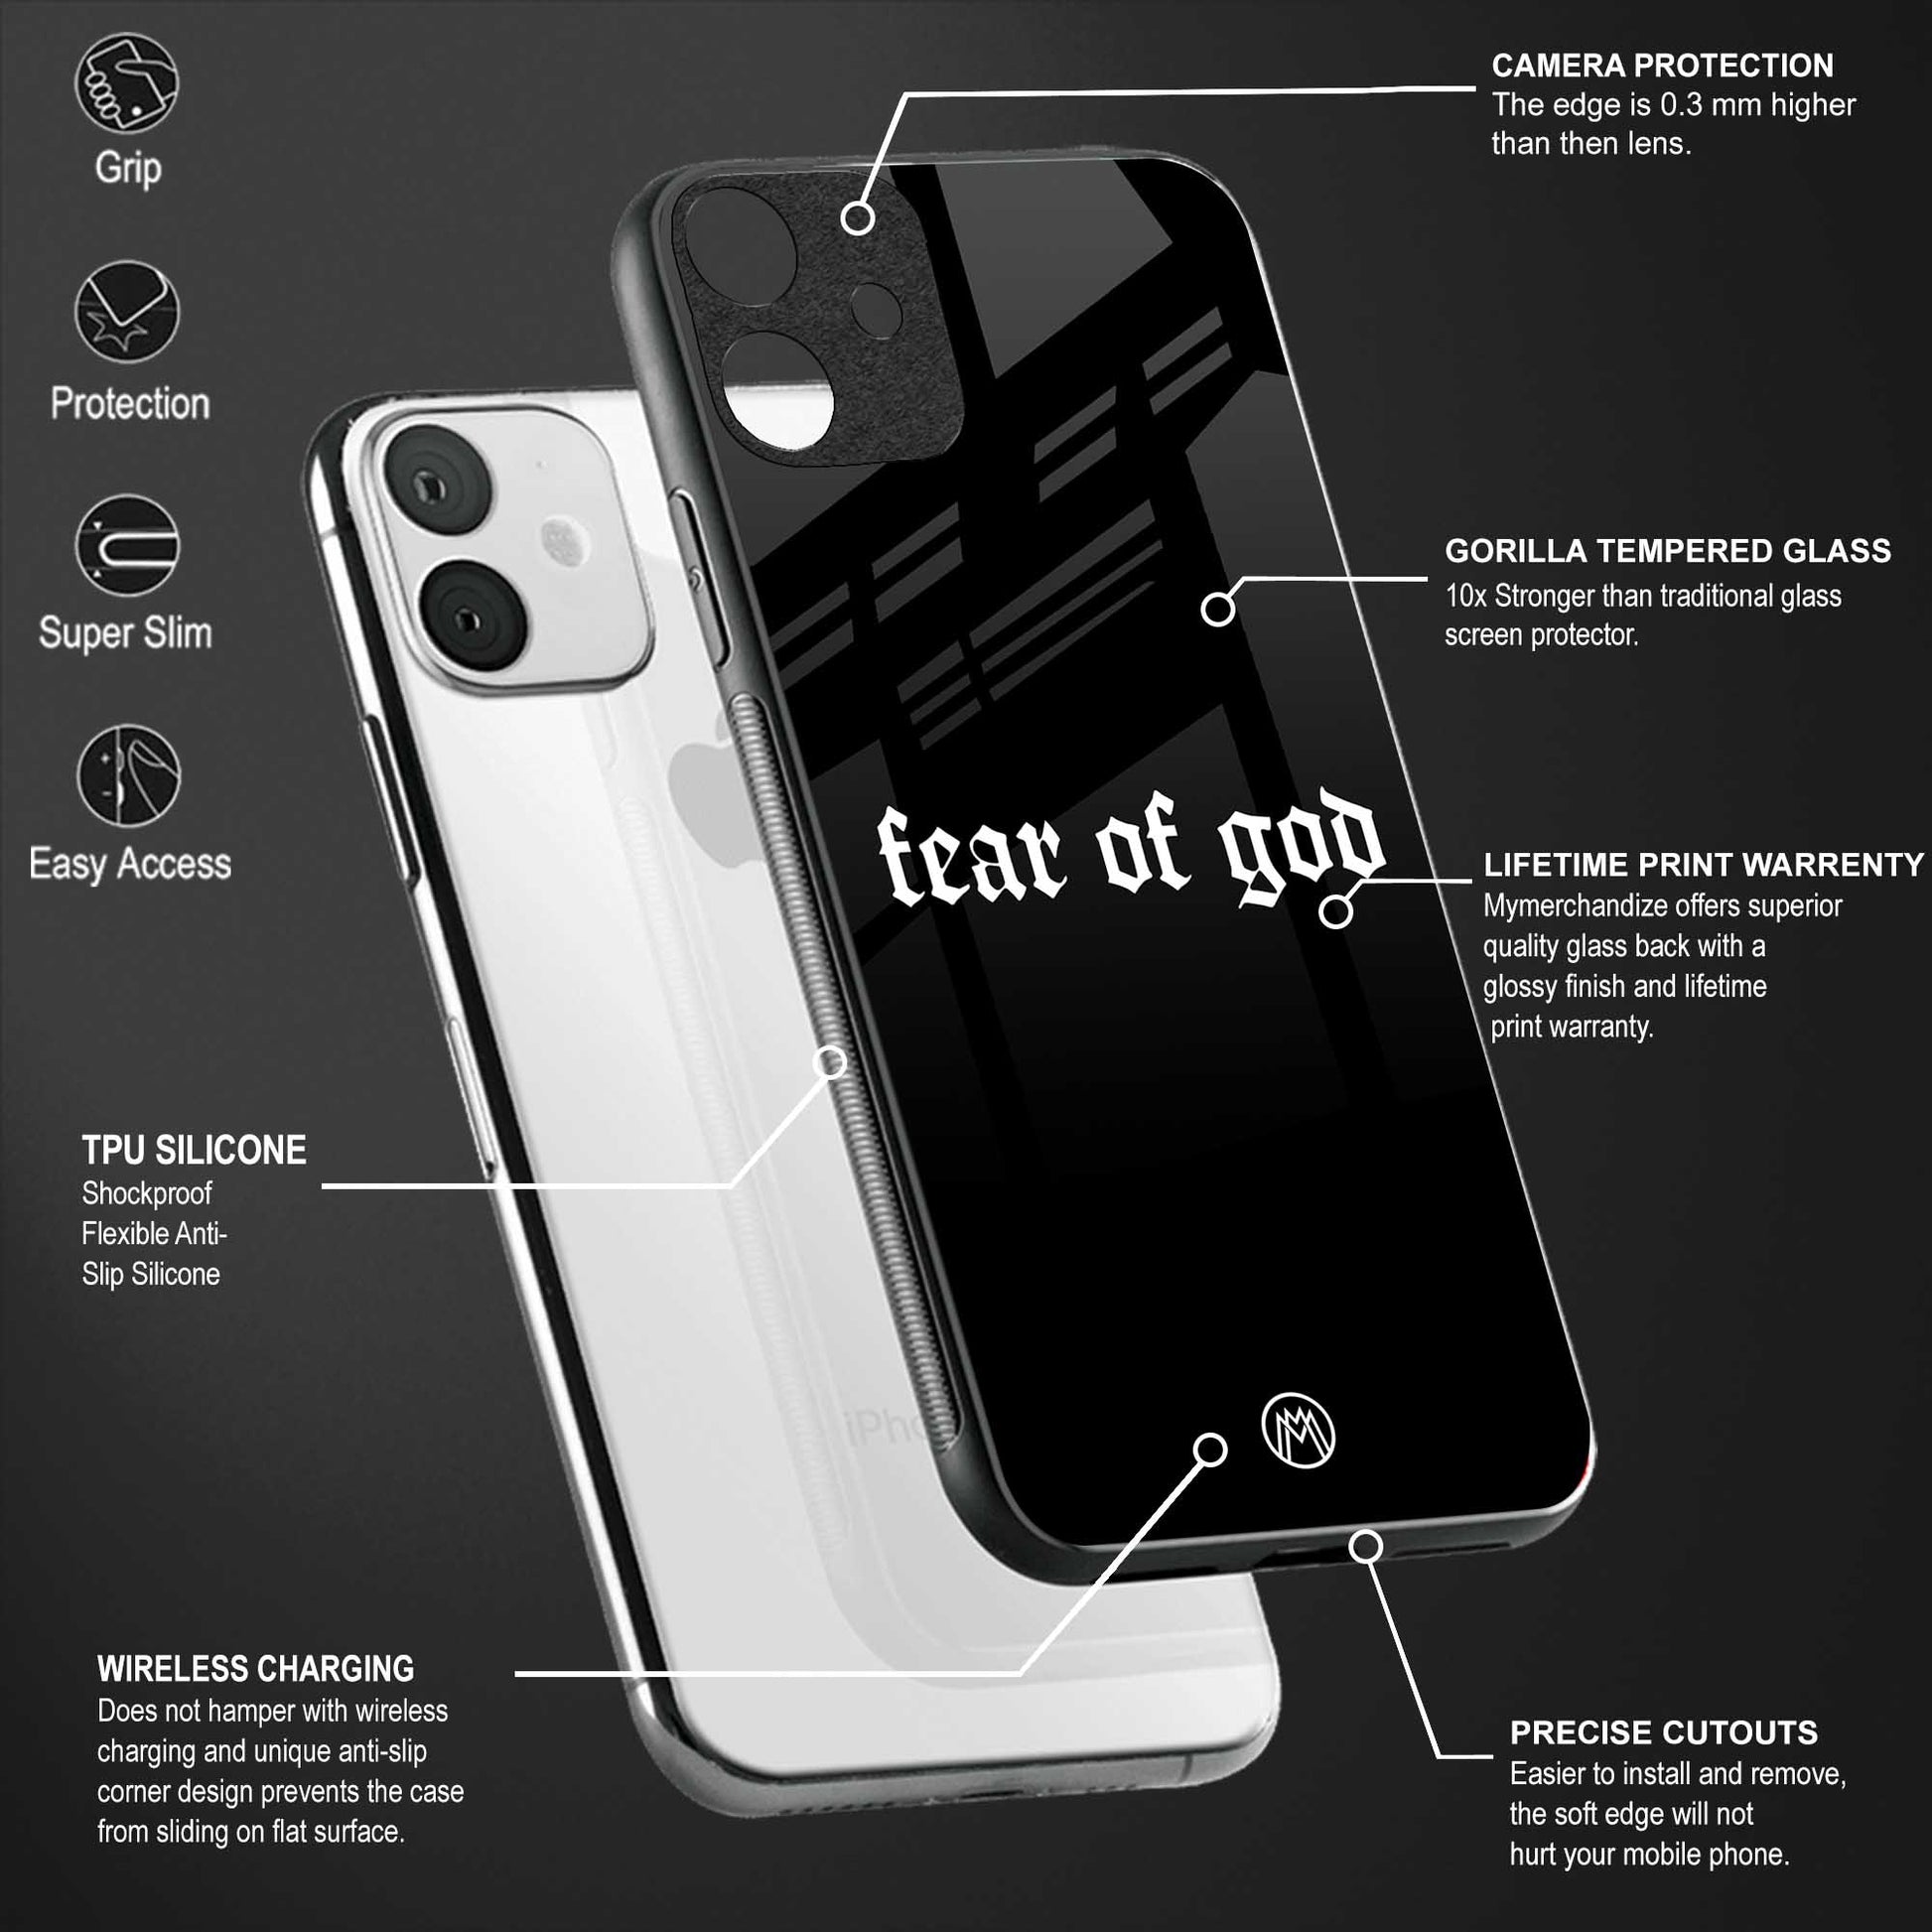 fear of god phone cover for samsung a21